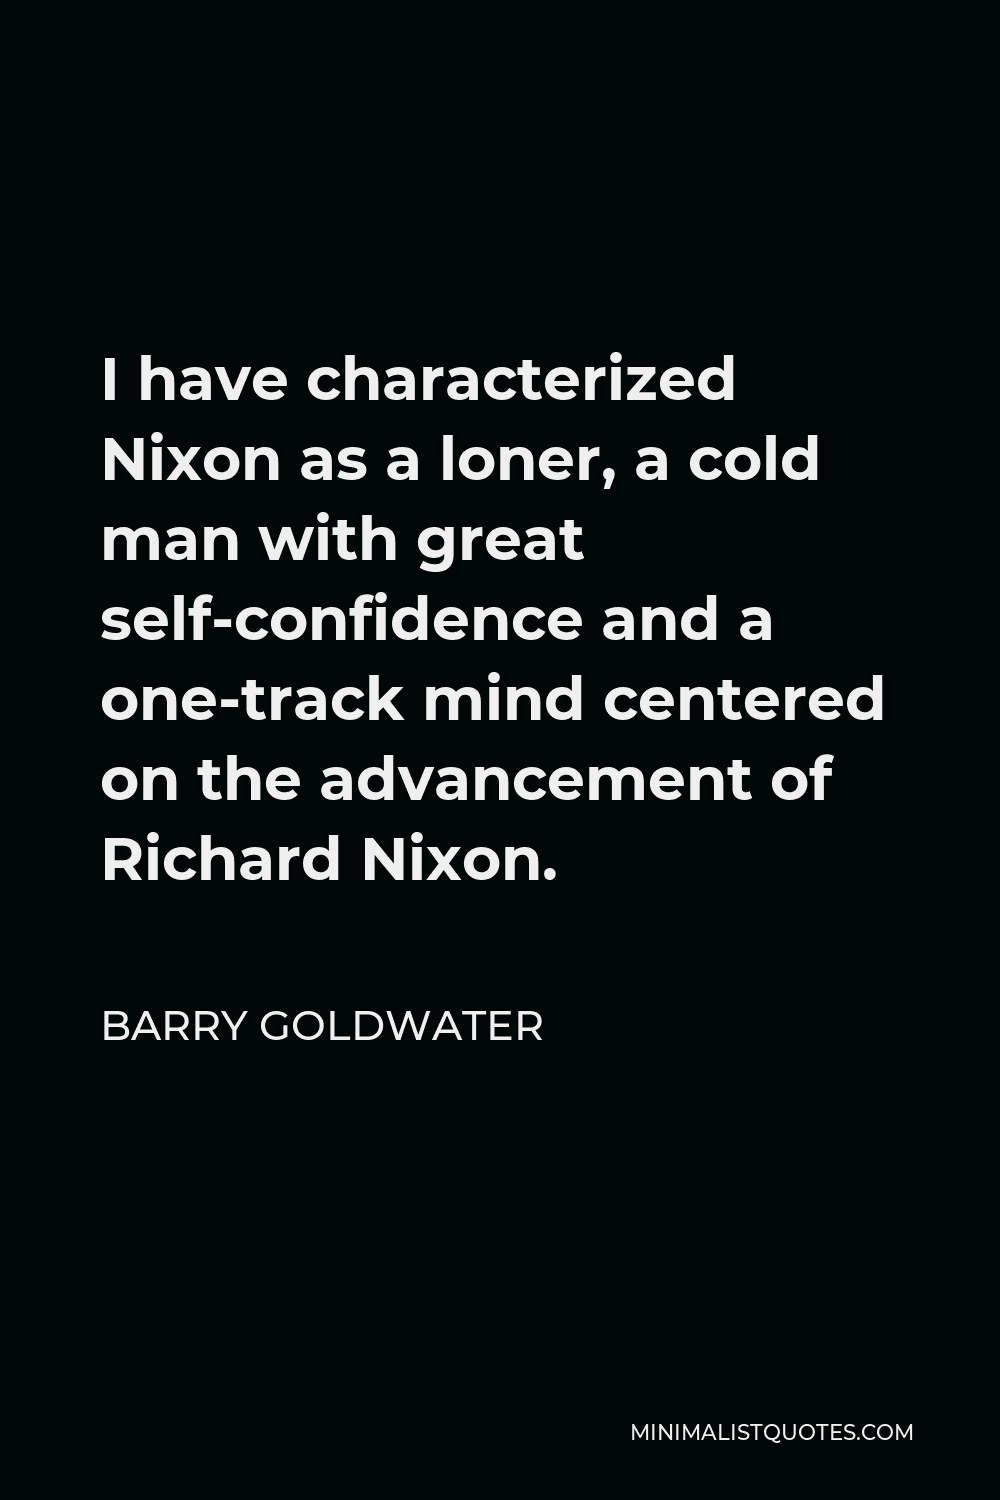 Barry Goldwater Quote - I have characterized Nixon as a loner, a cold man with great self-confidence and a one-track mind centered on the advancement of Richard Nixon.